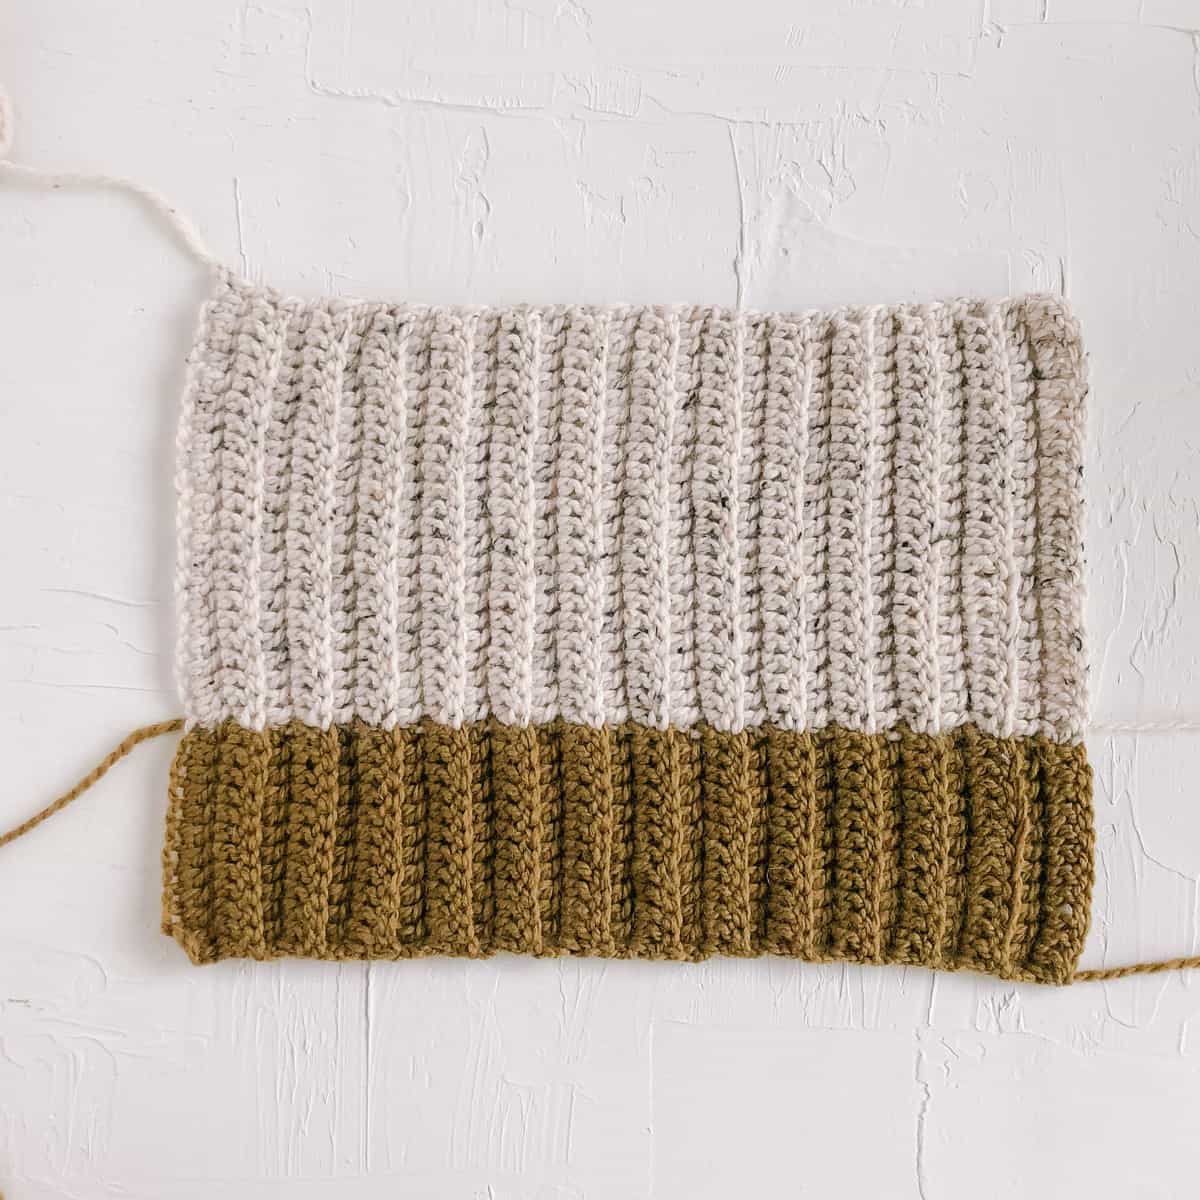 A color blocked crochet rectangle that is green on the bottom half and cream colored on the top section.